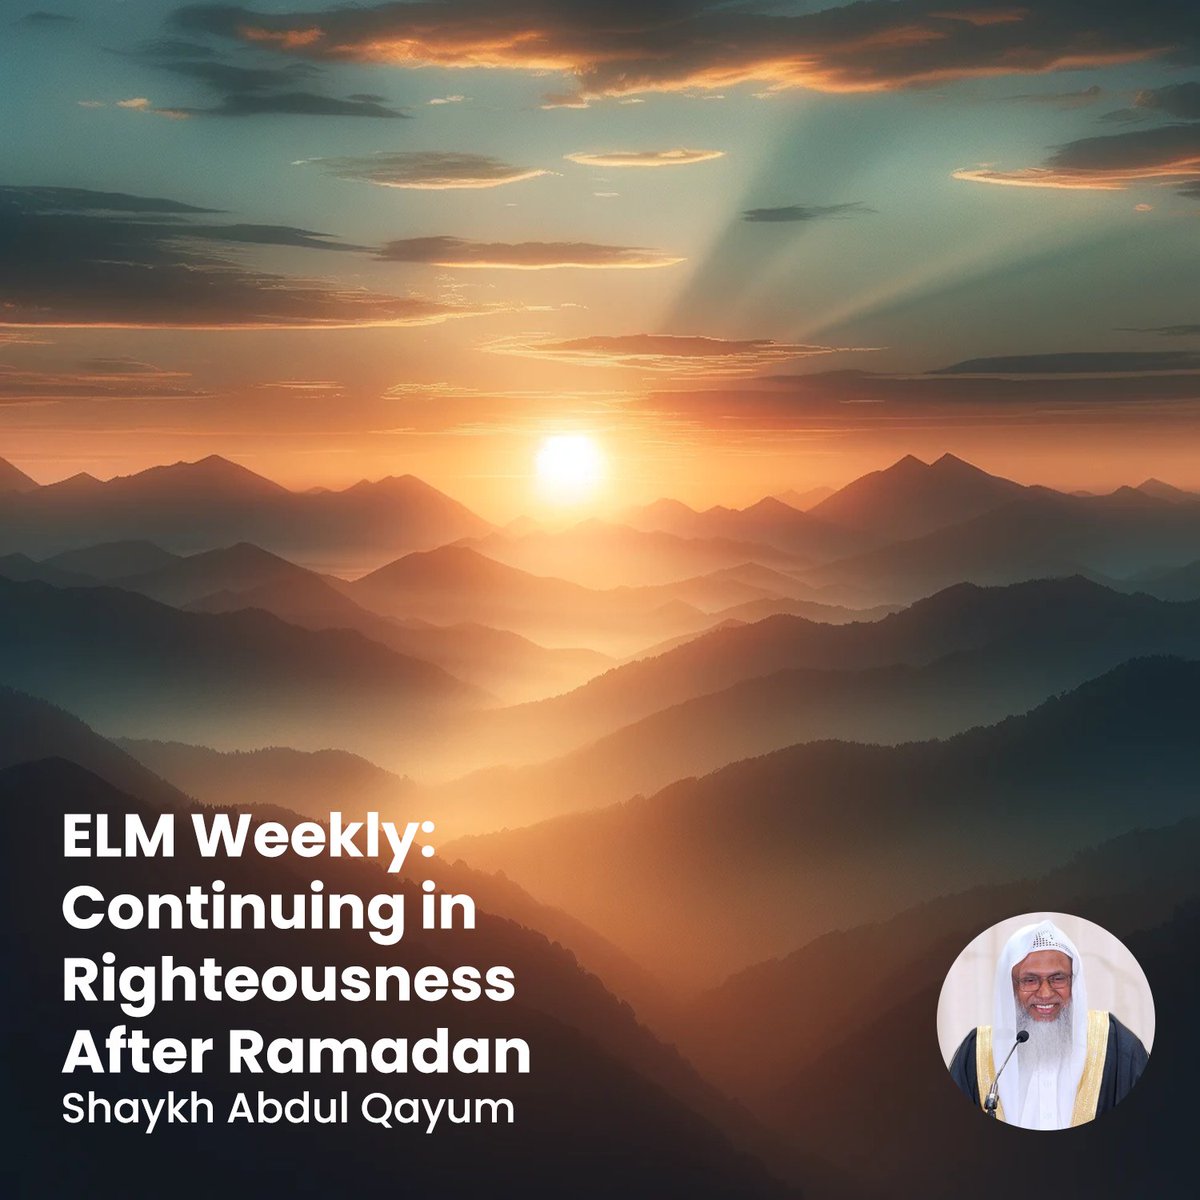 This week's blog inspires us to carry forward the devotion and dedication we display during Ramadan. Let's step into the months ahead with hearts brimming with faith. 🔗 Read the blog: eastlondonmosque.org.uk/blog/continuin… #EastLondonMosque #ContinuedFaith #SpiritualPersistence #PostRamadan